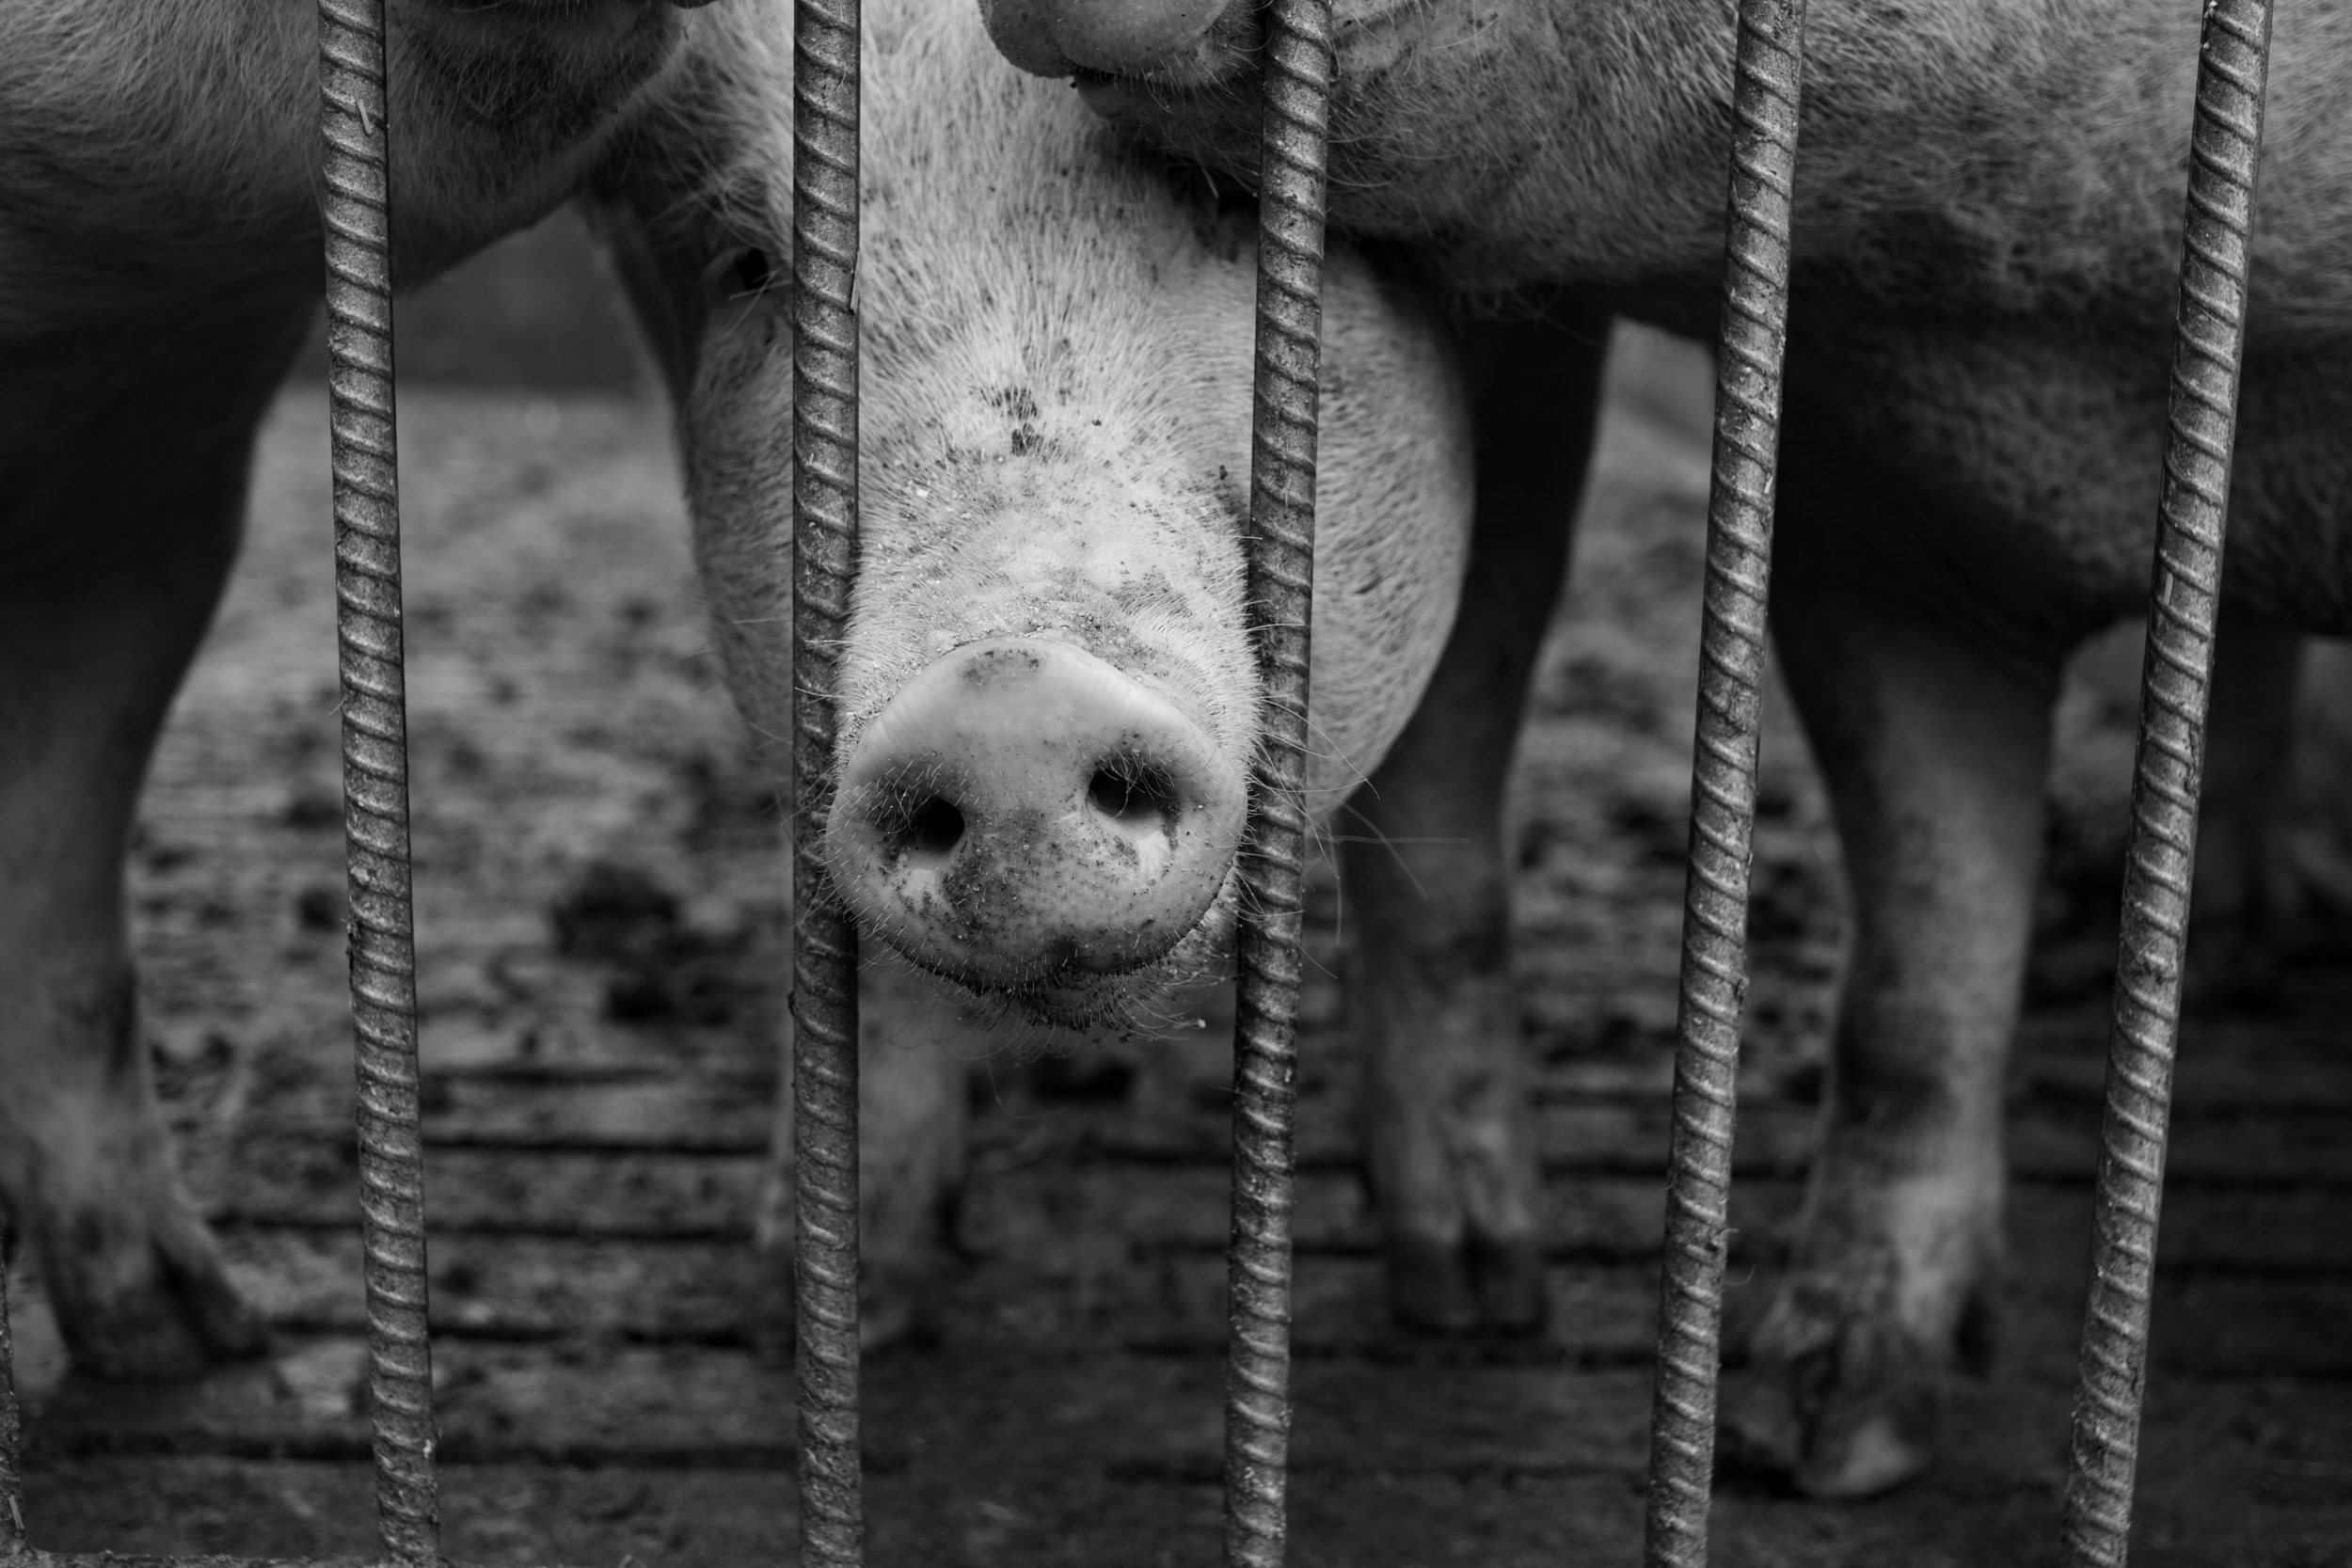 A pig sticking its nose through the. barrier and checking us out, on a farm near where we live.